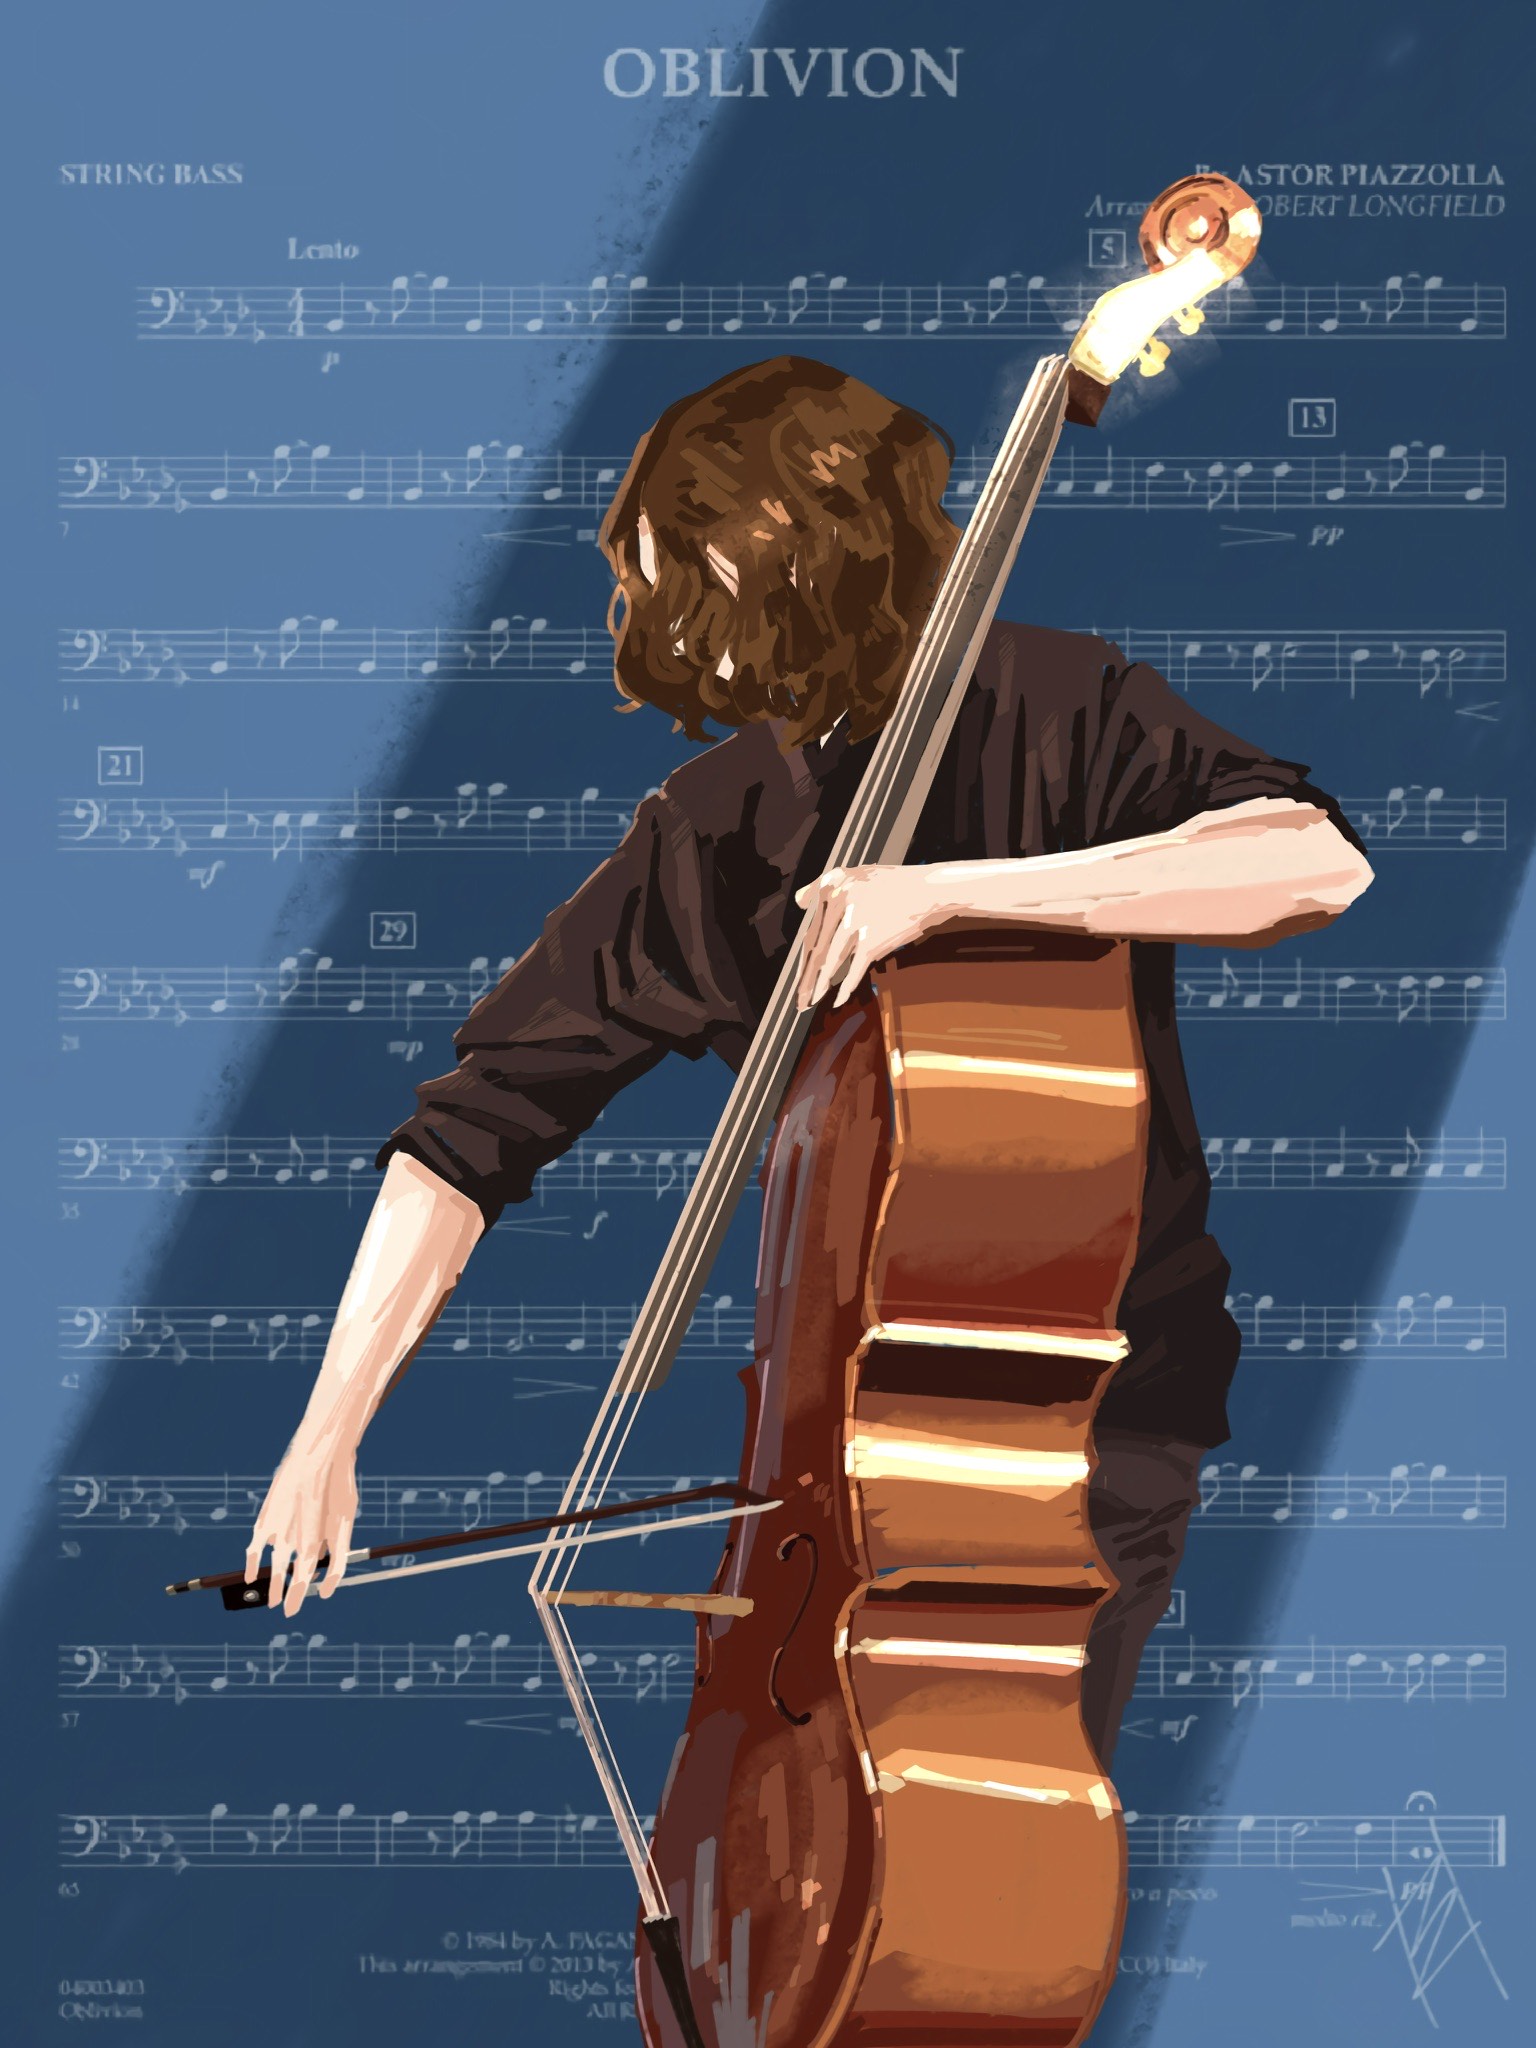 Digital art by Mica Viacrucis: a string bassist playing, with a blue background of sheet music titled Oblivion